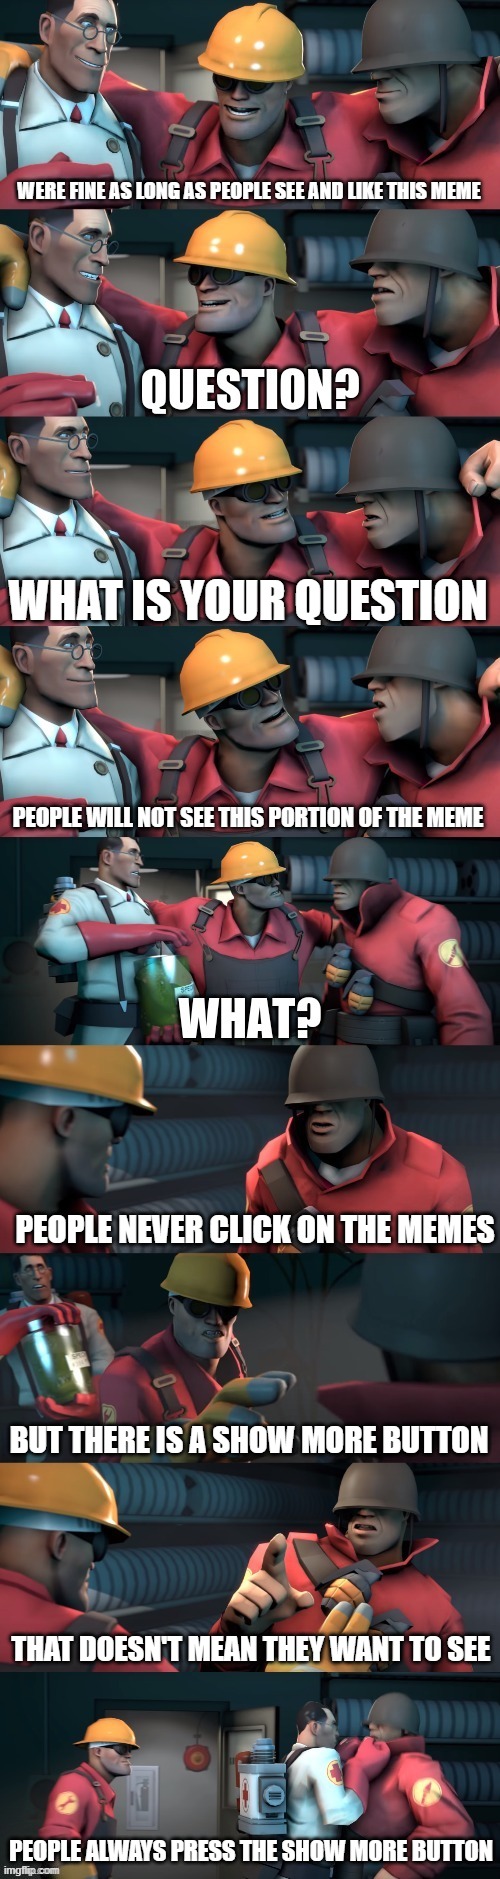 Who even reads these? | WERE FINE AS LONG AS PEOPLE SEE AND LIKE THIS MEME; WHAT IS YOUR QUESTION; PEOPLE WILL NOT SEE THIS PORTION OF THE MEME; PEOPLE NEVER CLICK ON THE MEMES; BUT THERE IS A SHOW MORE BUTTON; THAT DOESN'T MEAN THEY WANT TO SEE; PEOPLE ALWAYS PRESS THE SHOW MORE BUTTON | image tagged in tf2 teleport bread meme english,tf2,funny,meta,4th wall,gaming | made w/ Imgflip meme maker